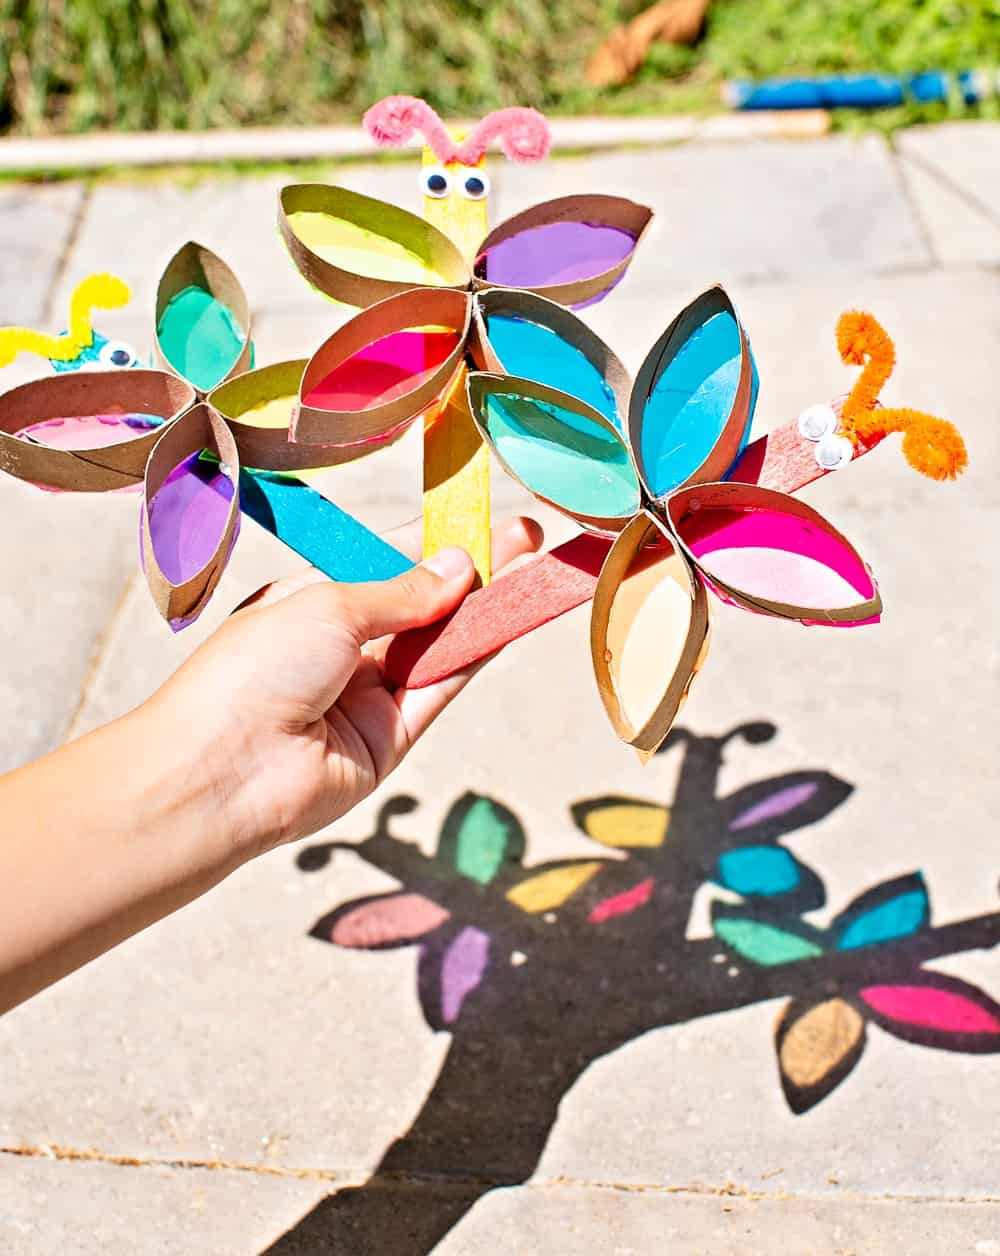 What Are The Best Easy and Inexpensive Art Projects for Kids?